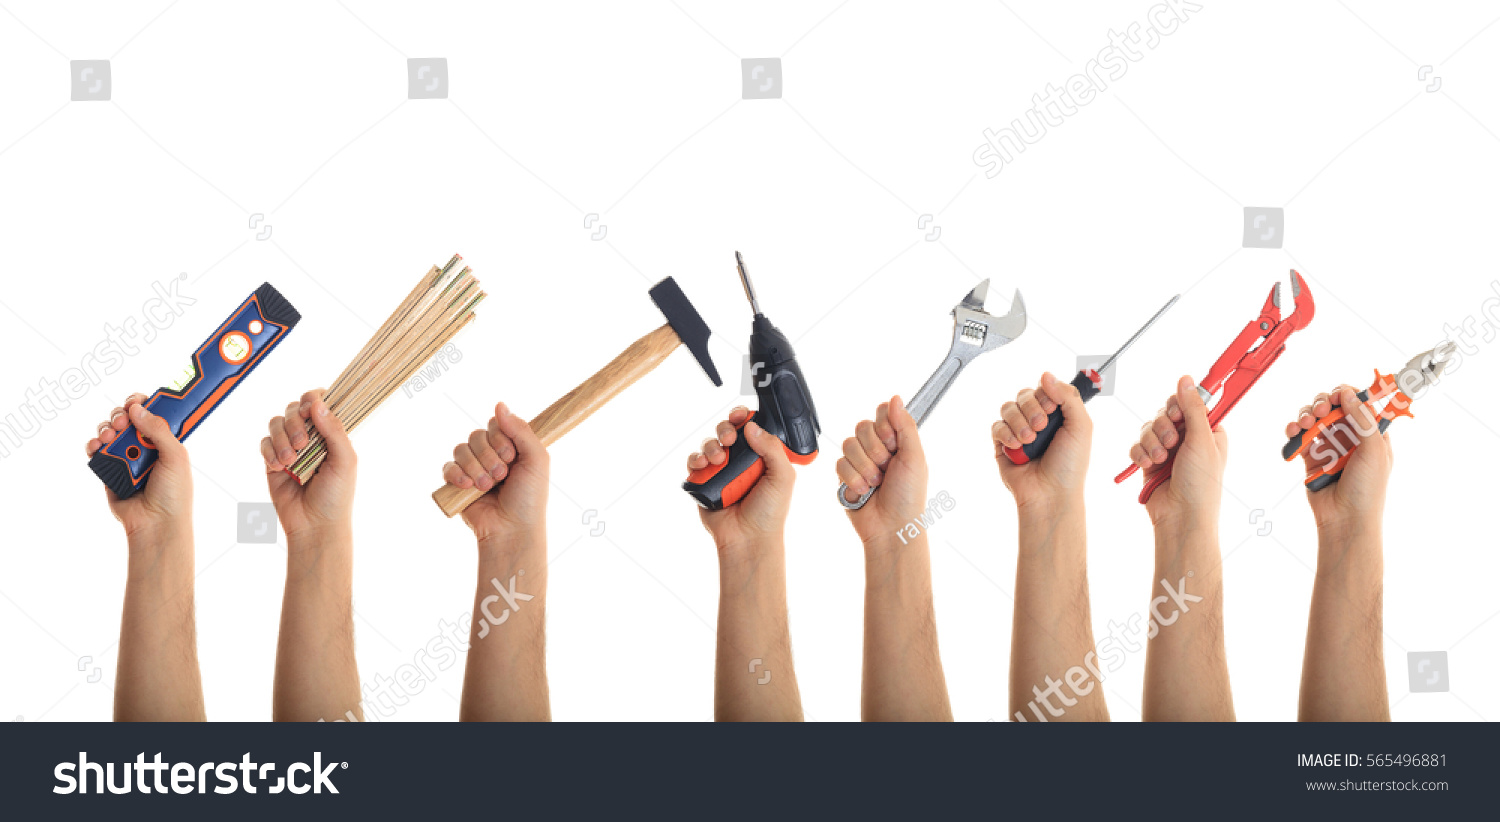 Hands holding hand tools isolated on white background #565496881